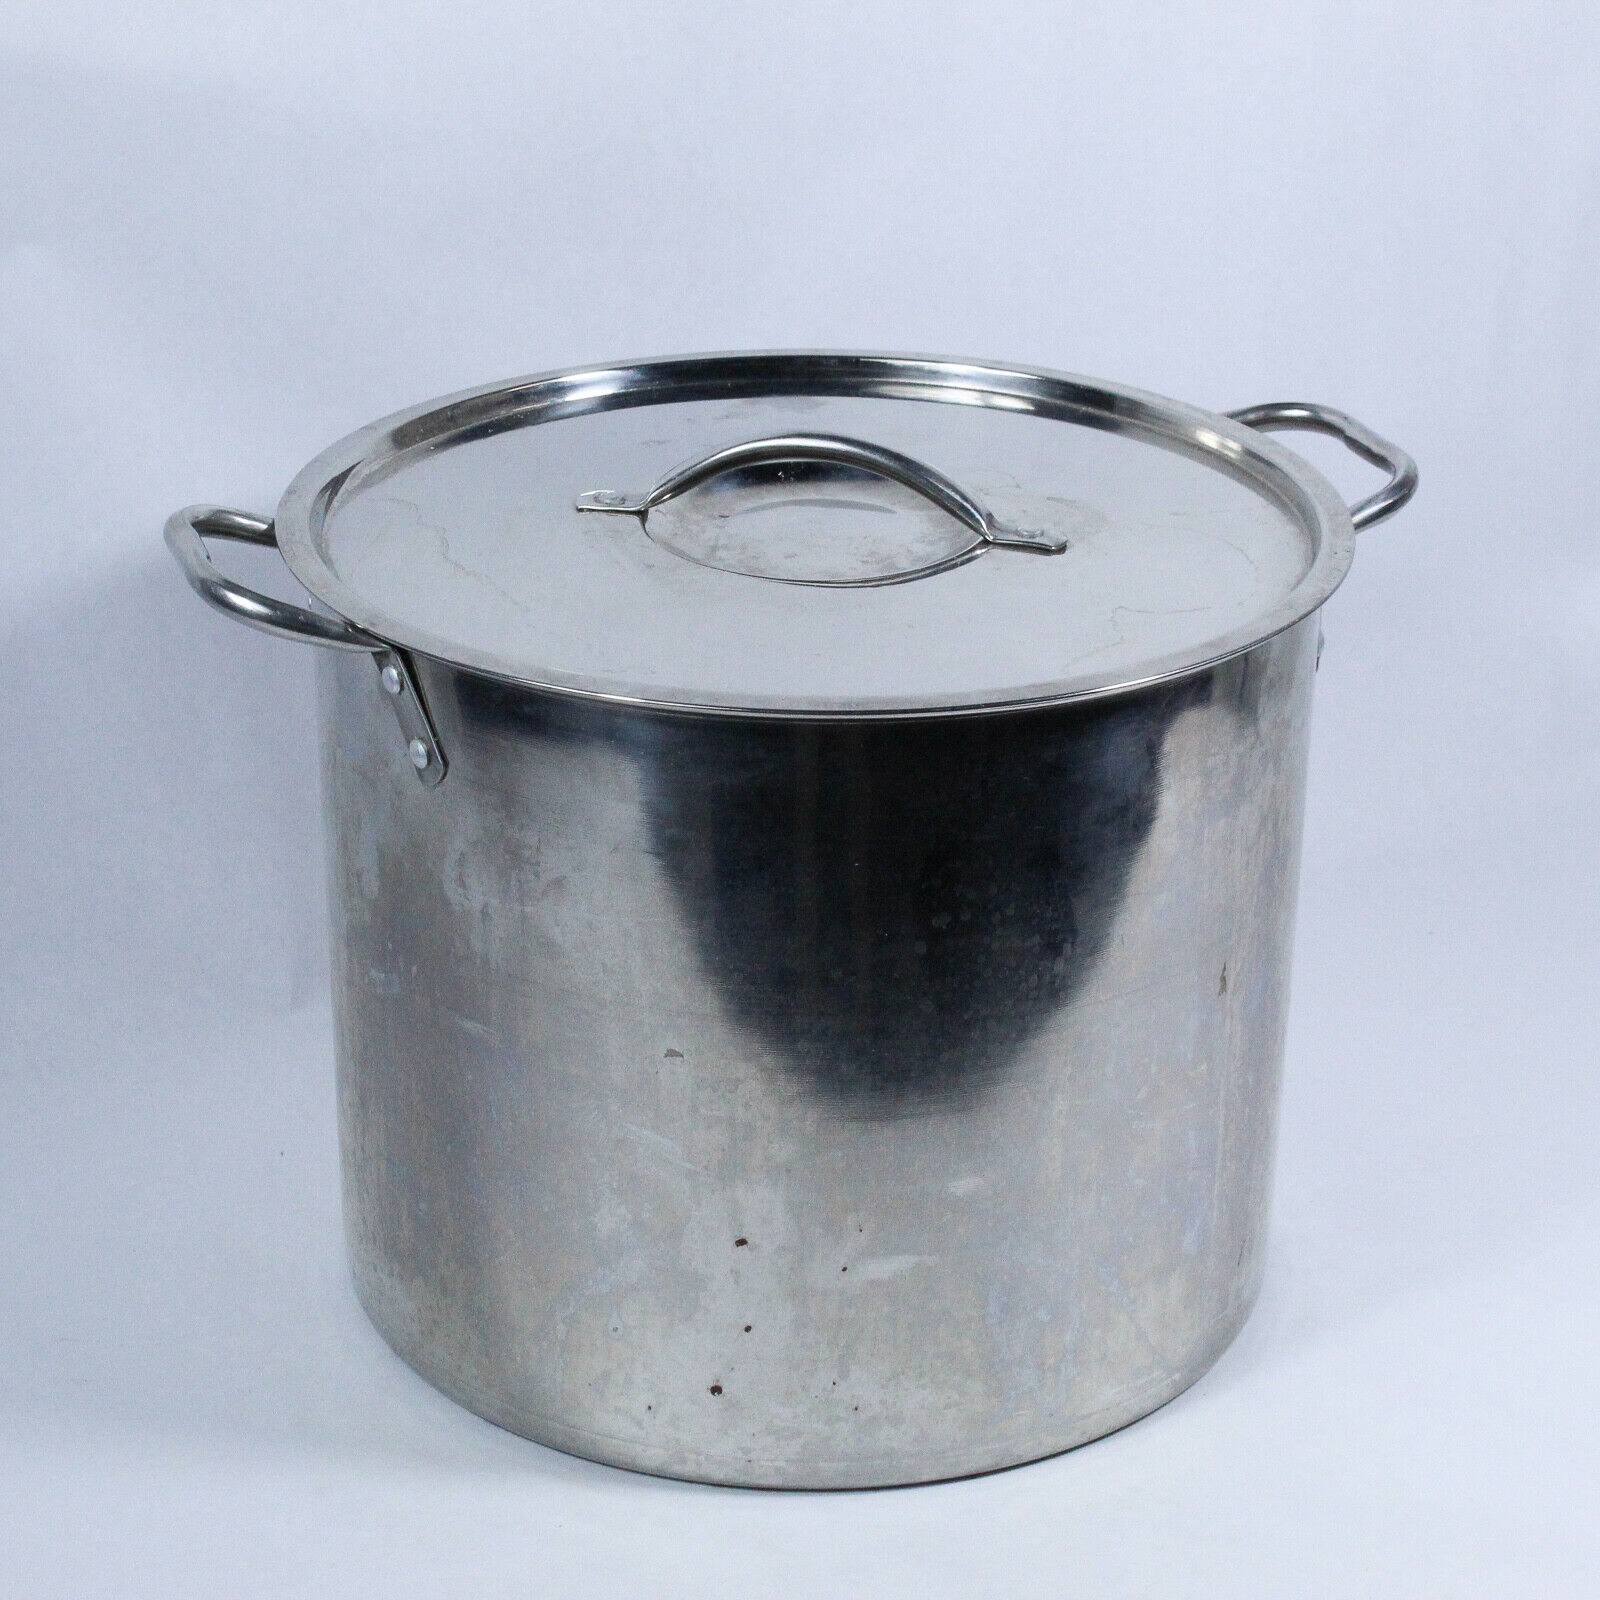 Vintage Large Stockpot Handles With Lid Silver Toned Kitchen 10.75 Inches Tall